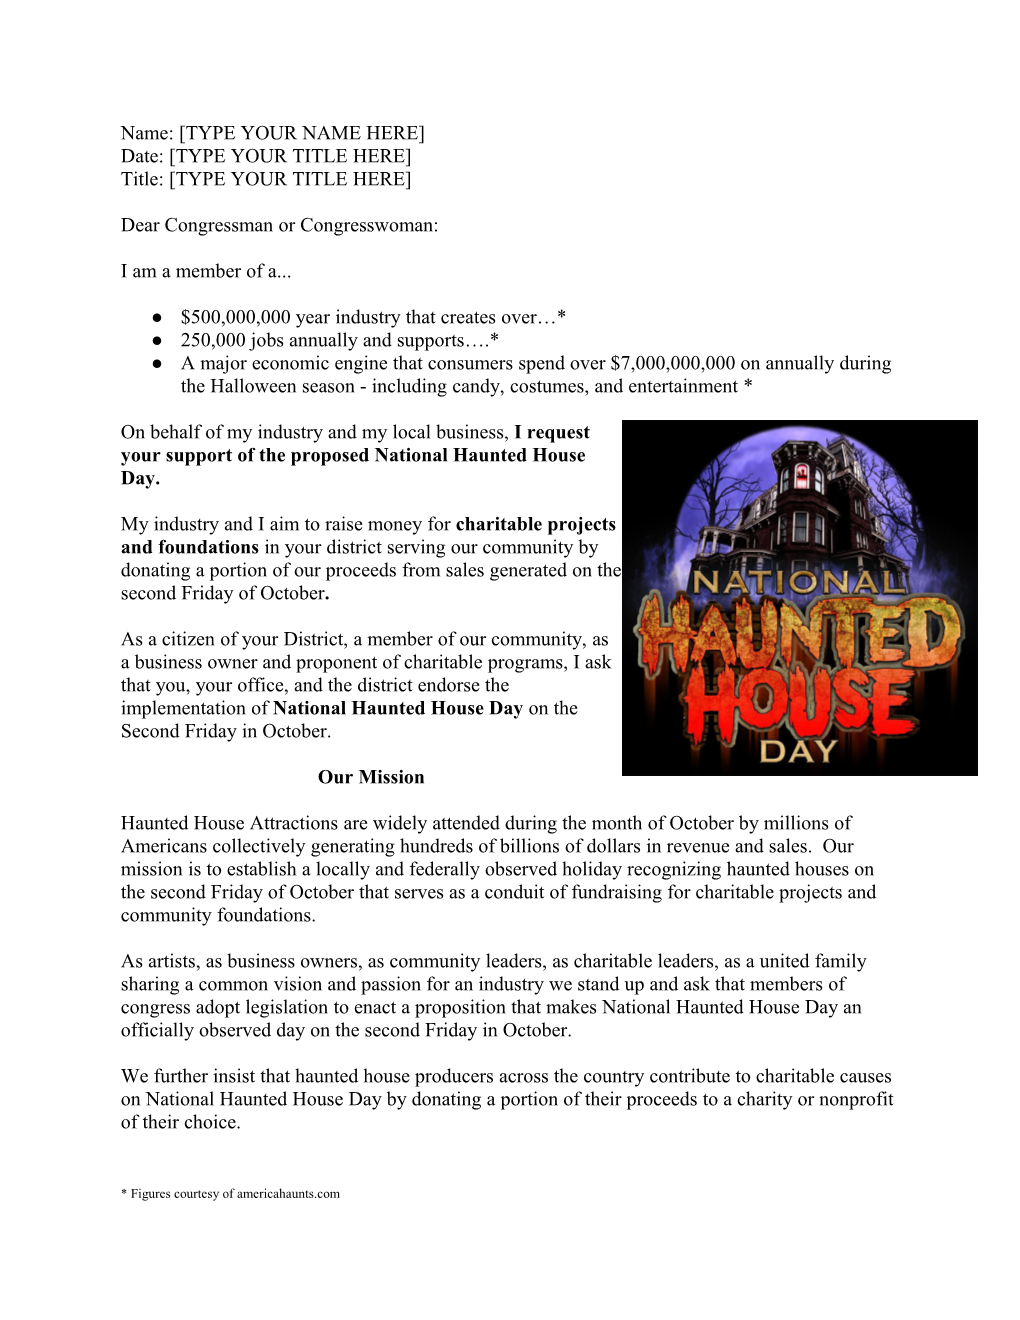 National Haunted House Day - Letter to Congress